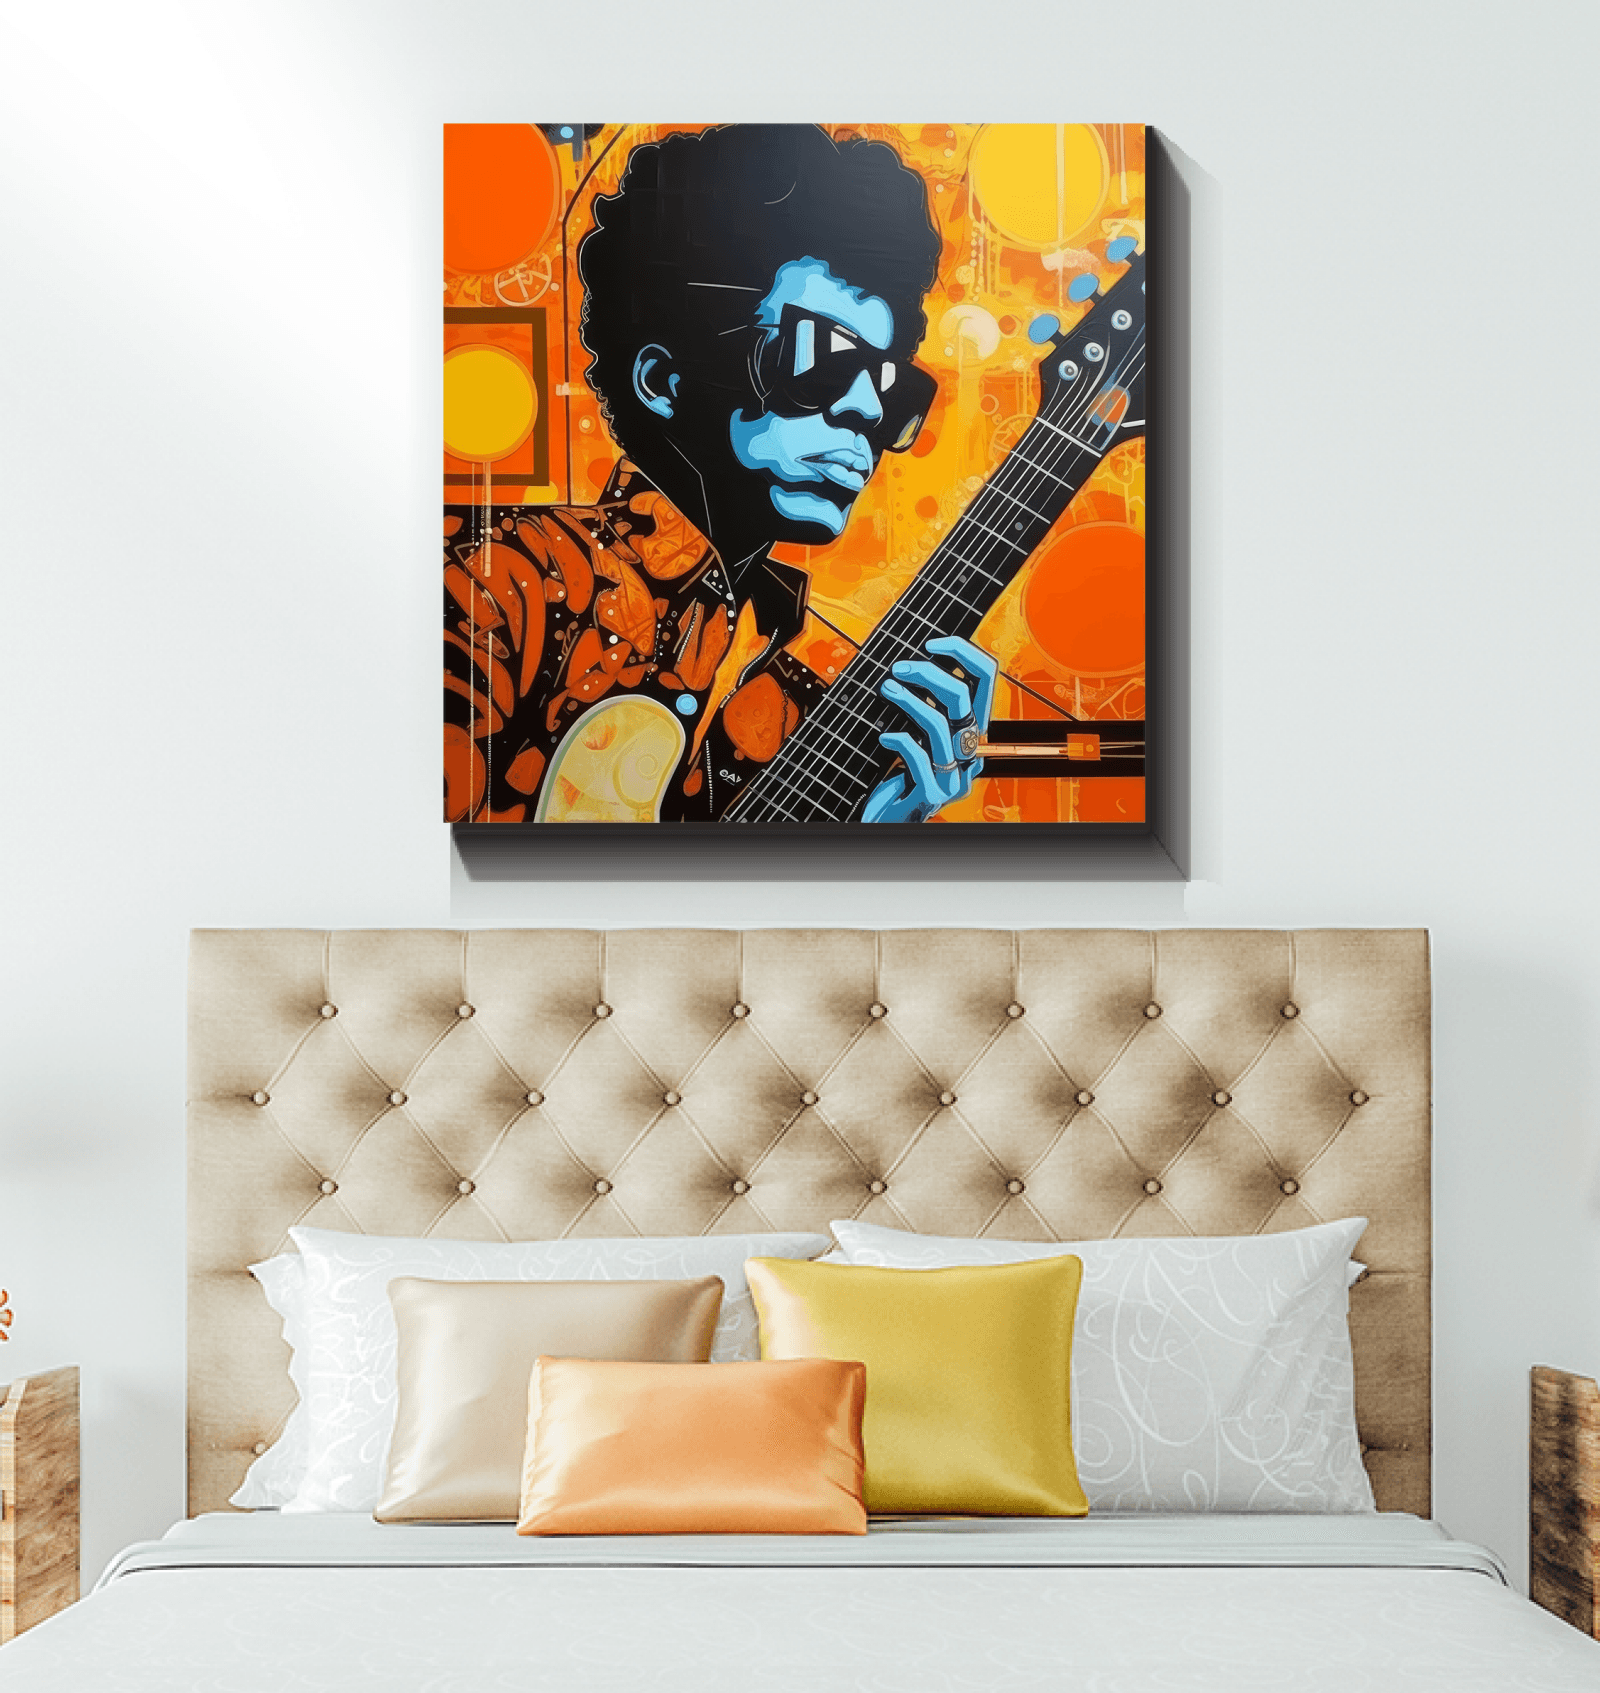 Pop Culture and Music Fusion Art on Wrapped Canvas.